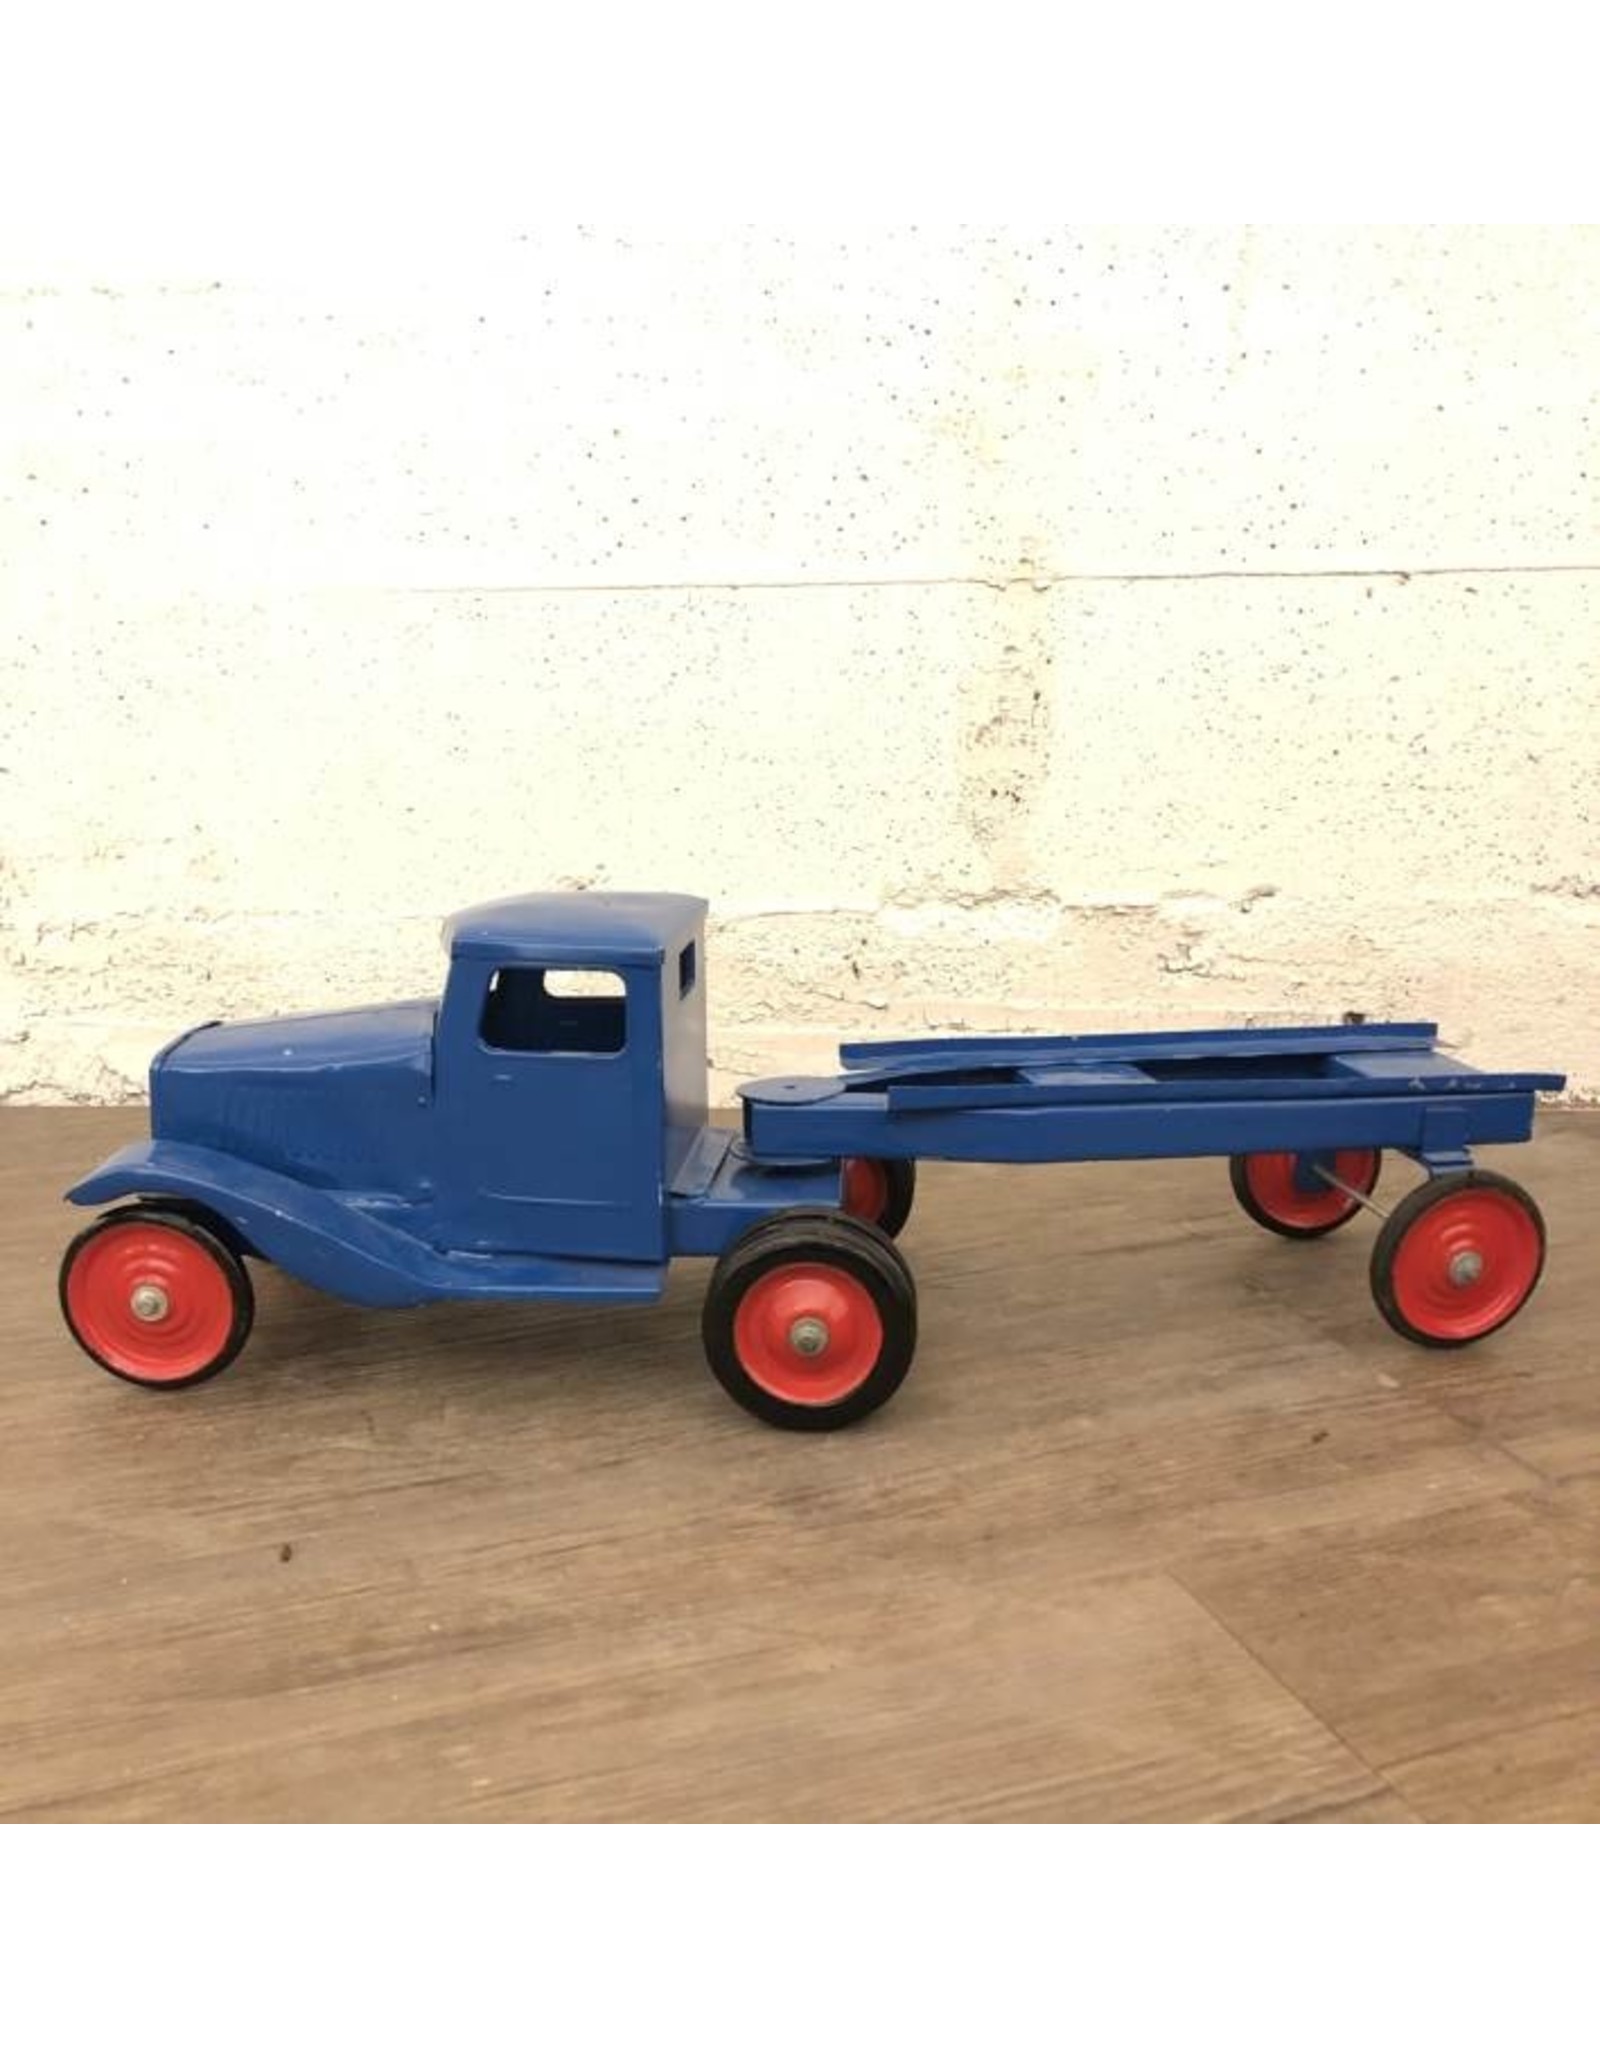 Toy truck and trailer painted blue